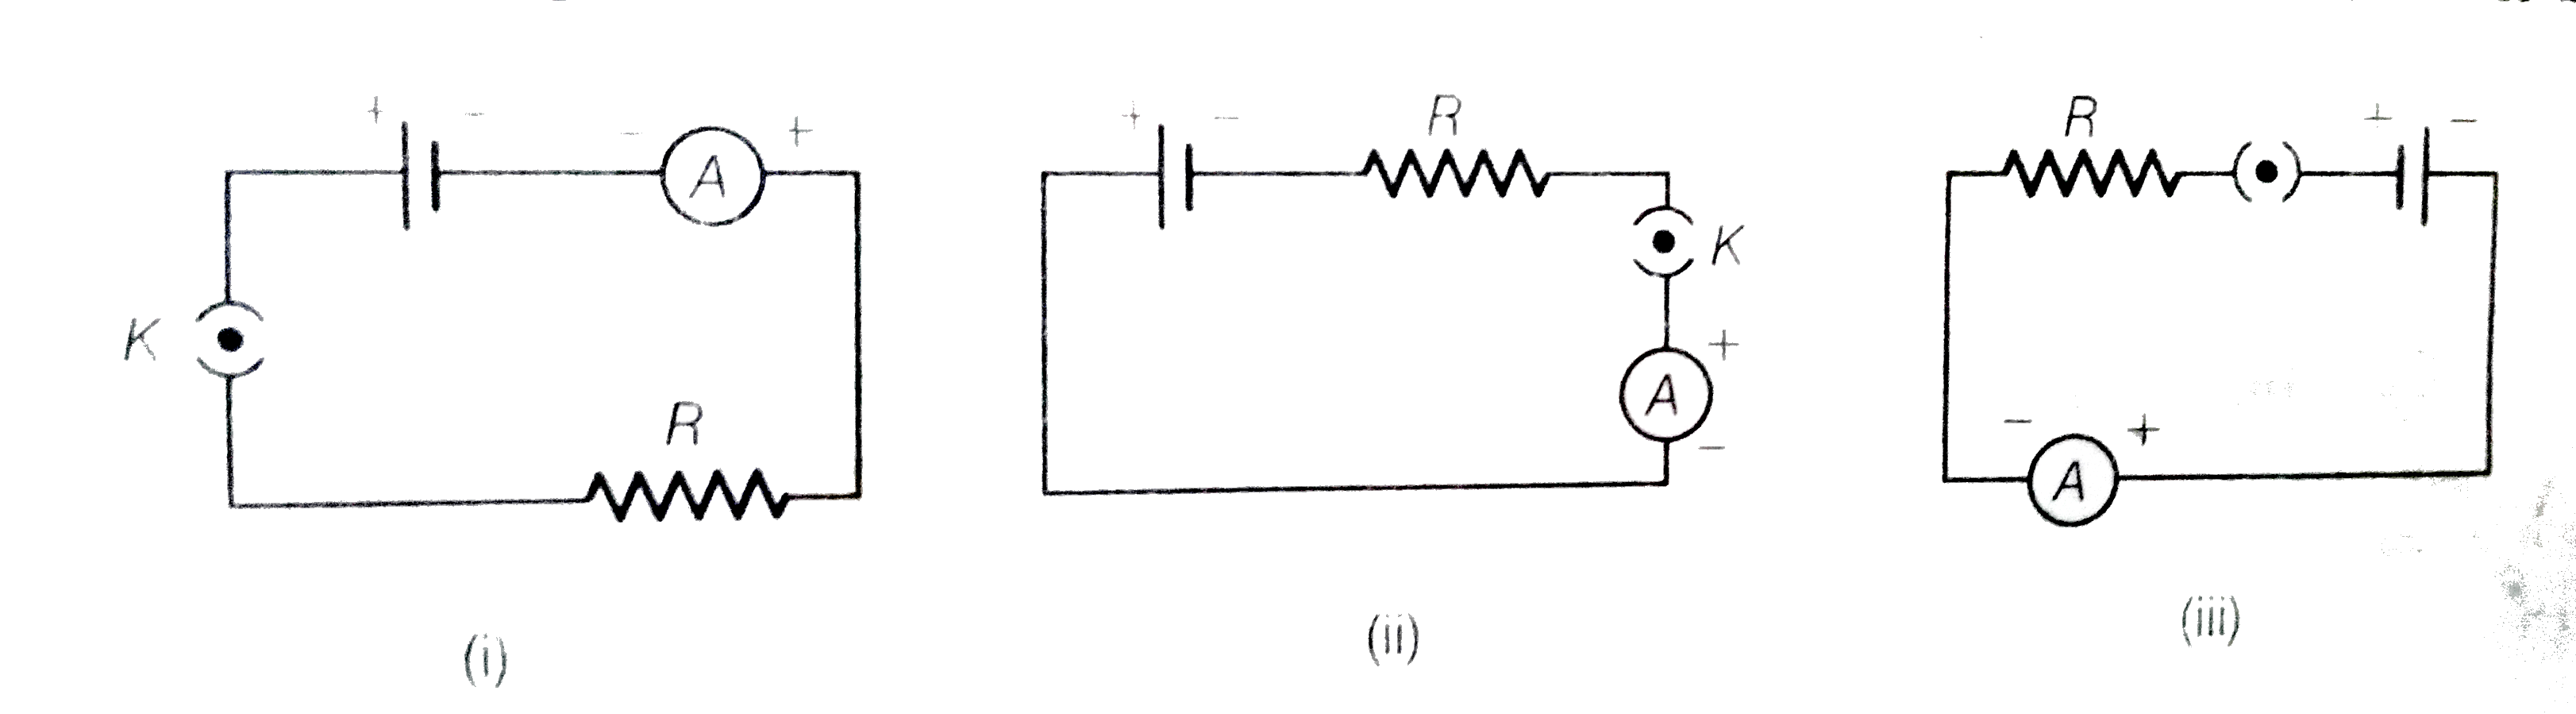 A cell, a resistor, a key and an ammeter are arranged as known in the circuit diagrams of figure. The current recorded in the ammeter will be